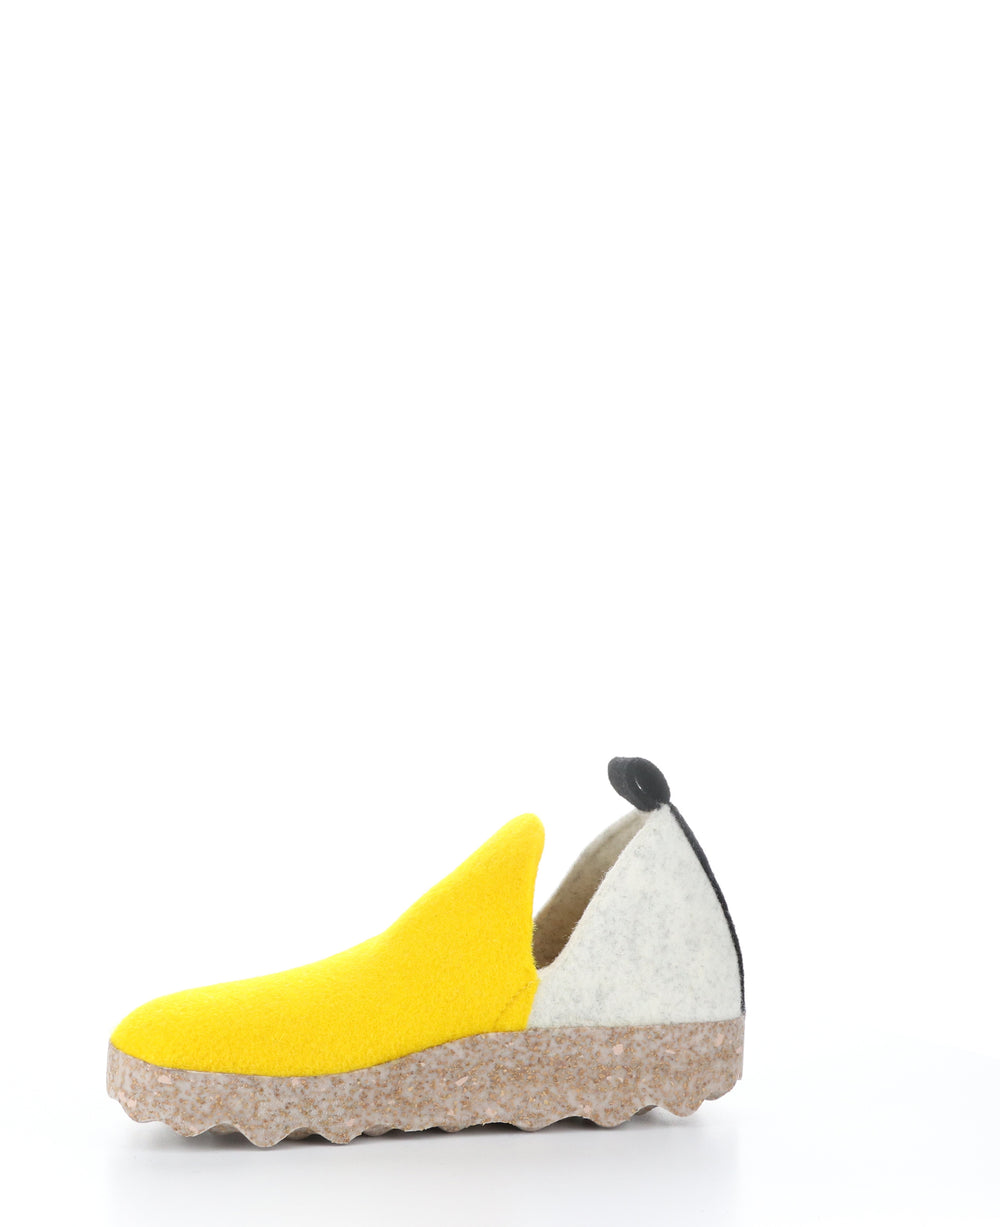 CITY086ASP Yellow/Owht/Blk Round Toe Shoes|CITY086ASP Chaussures à Bout Rond in Jaune